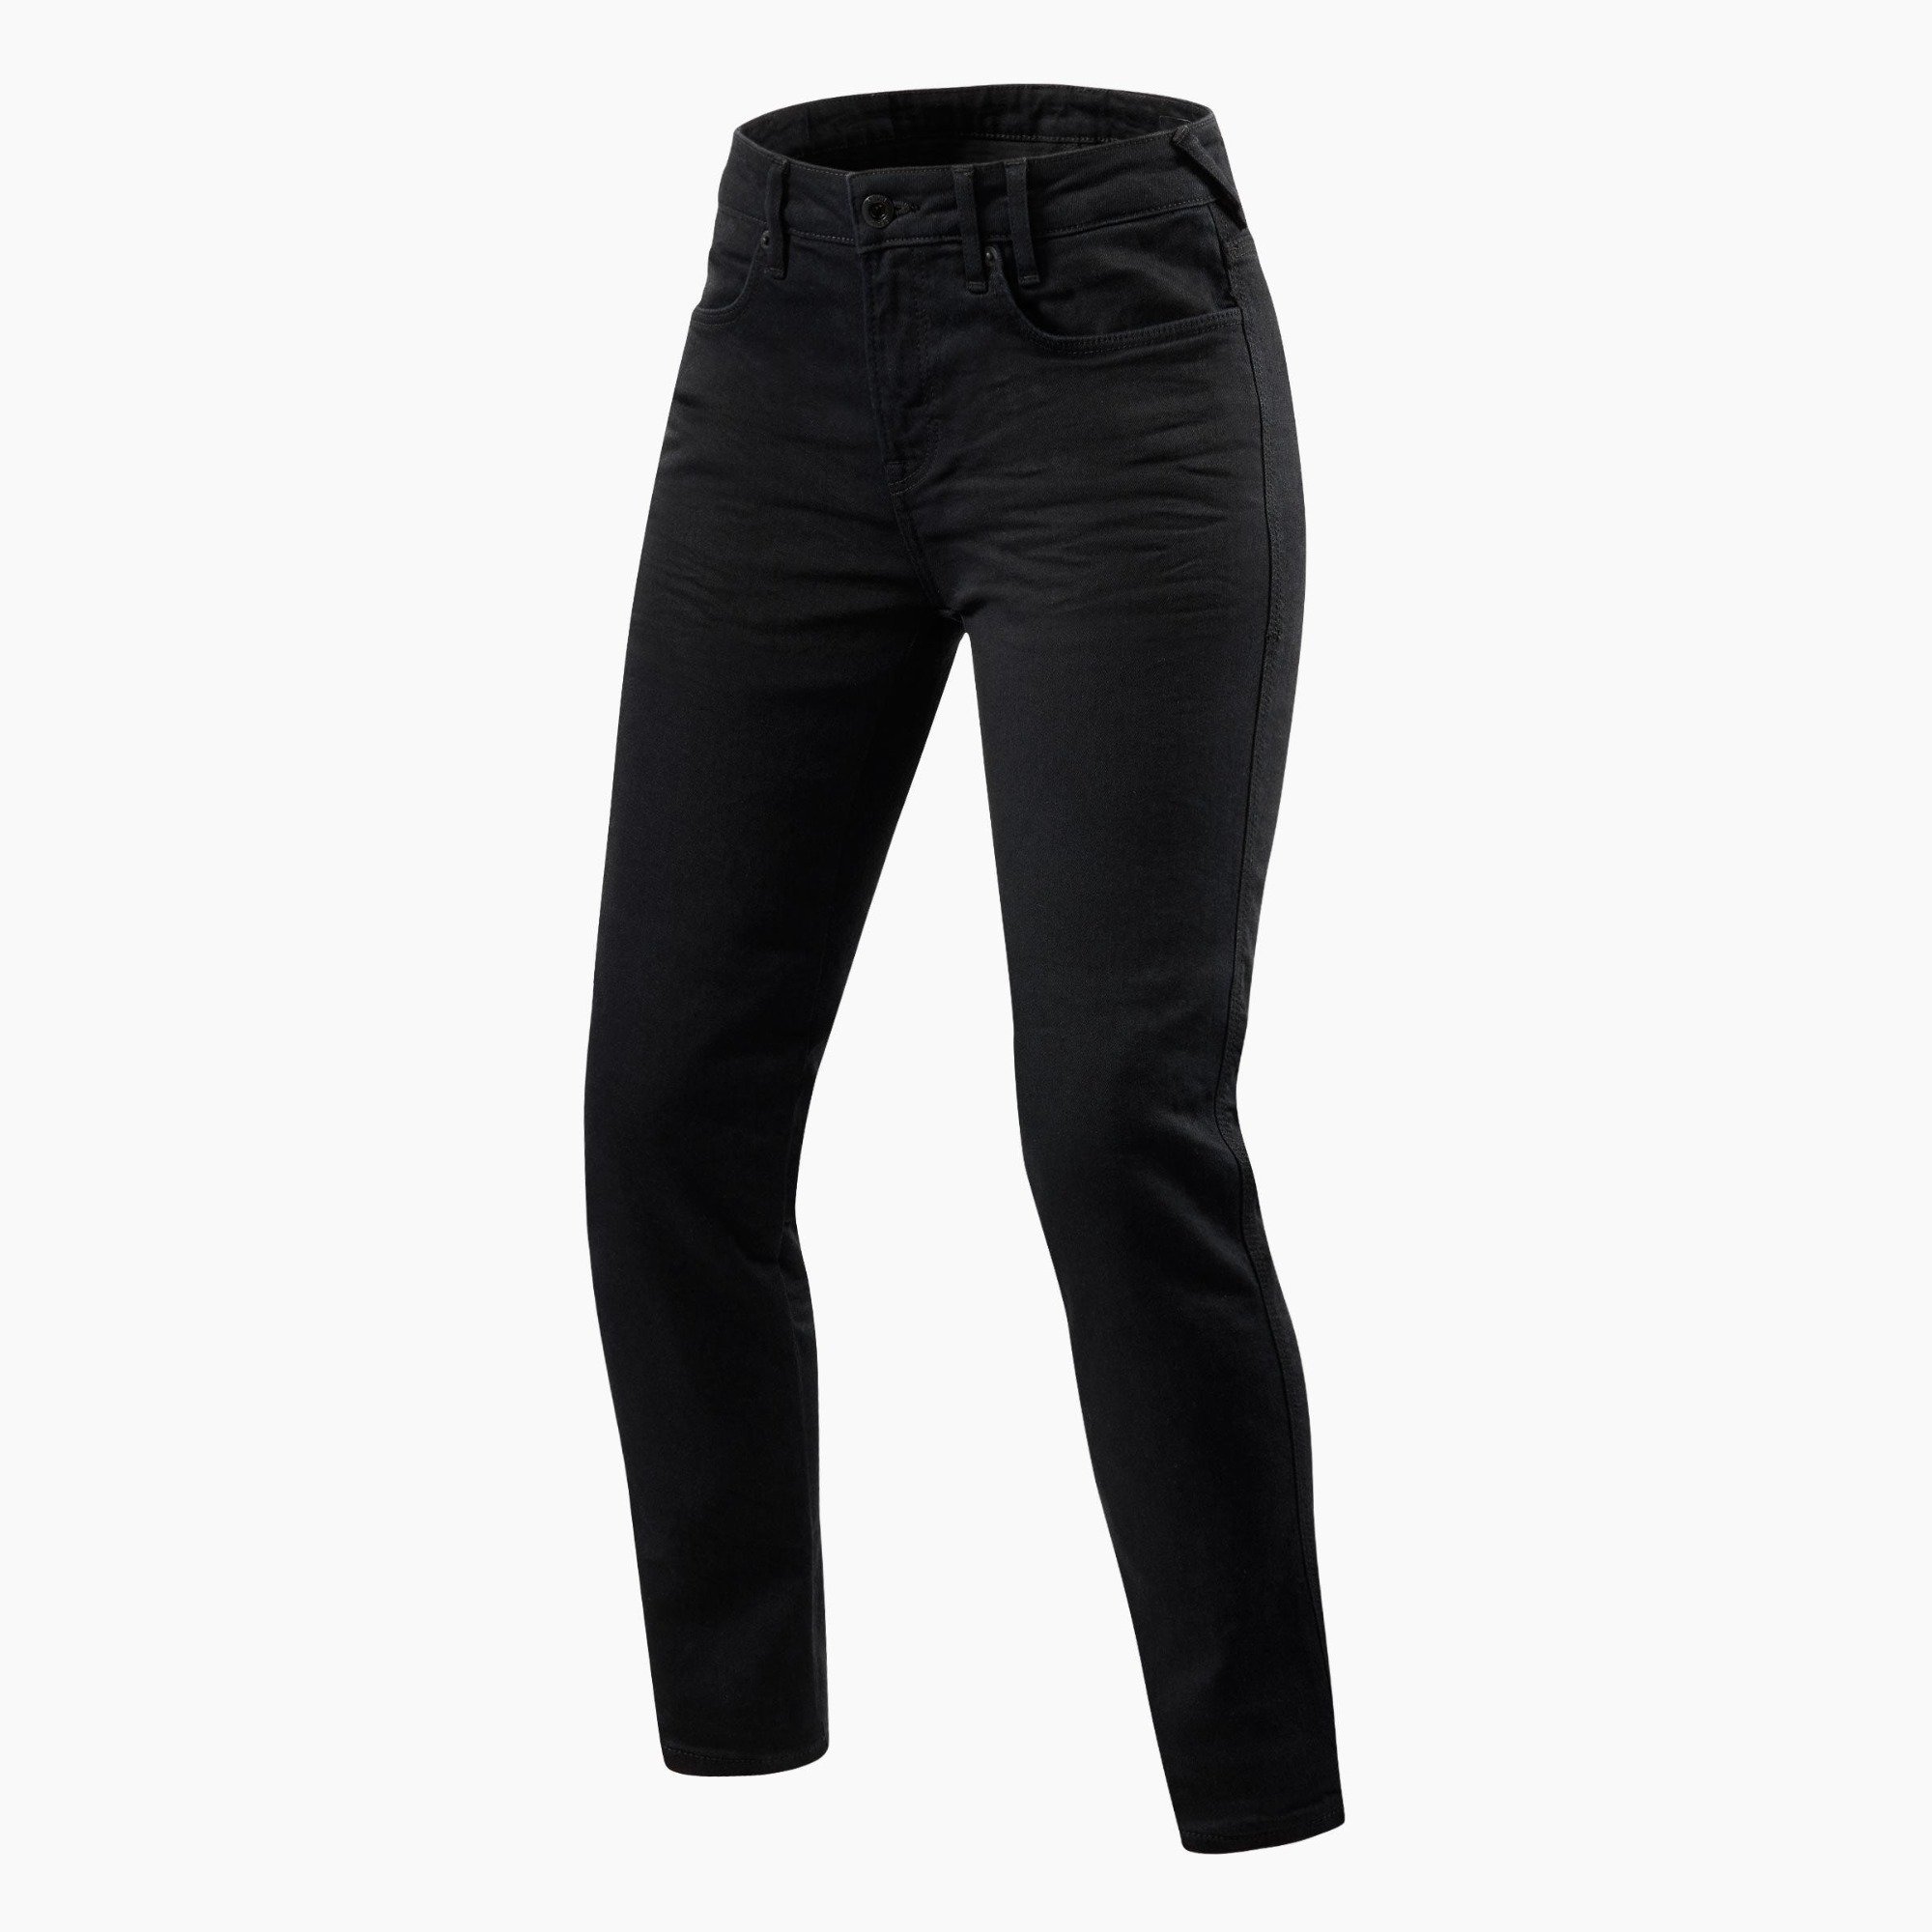 Image of REV'IT! Jeans Maple 2 Ladies SK Black Motorcycle Jeans Size L32/W30 ID 8700001342247